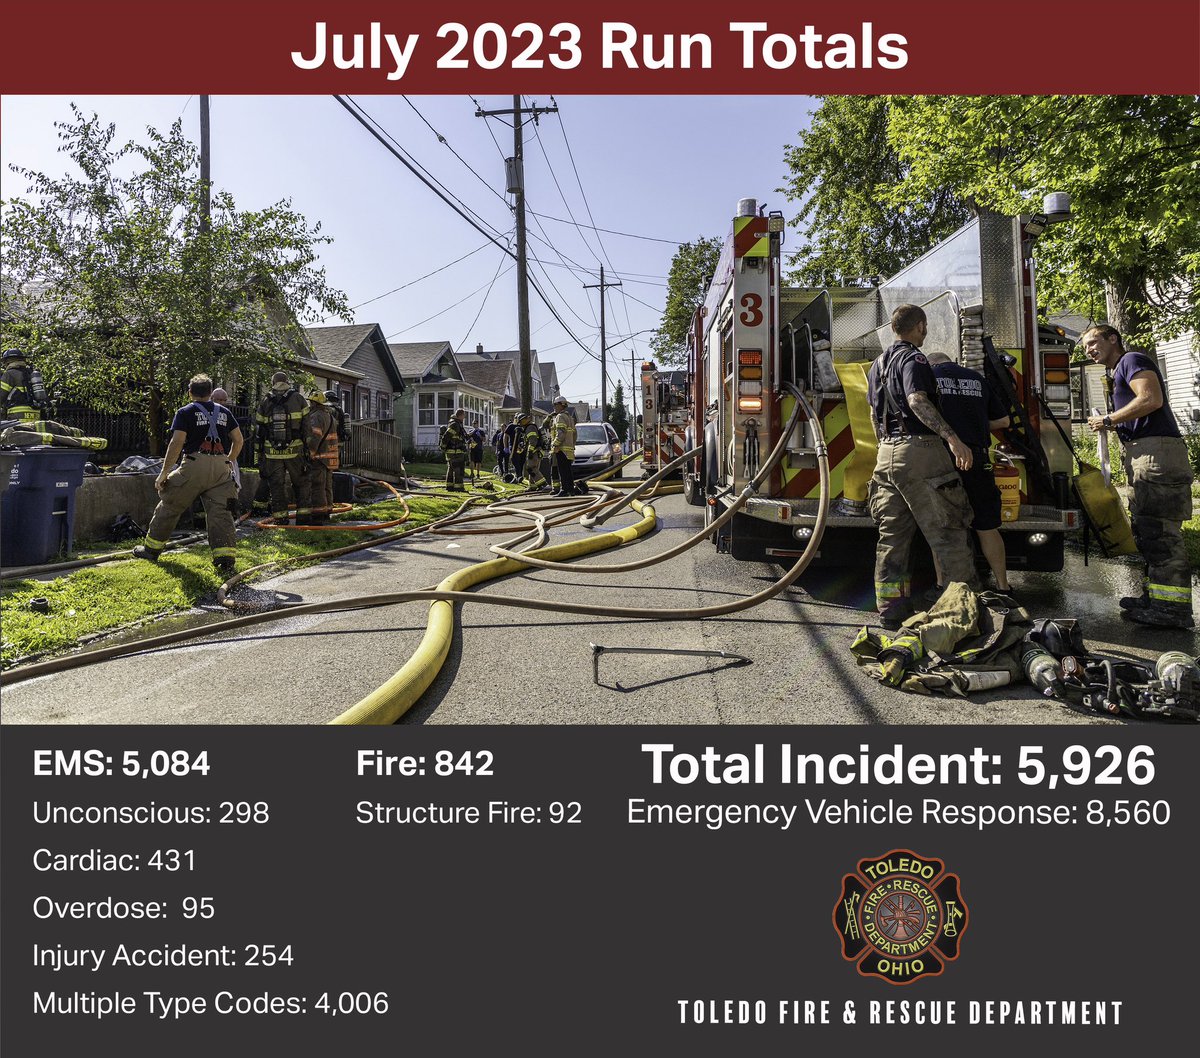 July 2023 - Toledo Firefighters responded to a total of 5,926 emergency incidents in July. With 842 fire related incidents including 92 structure fires and 5,084 EMS incidents that produced 8,560 emergency vehicle responses. #toledofire #toledofirefighters